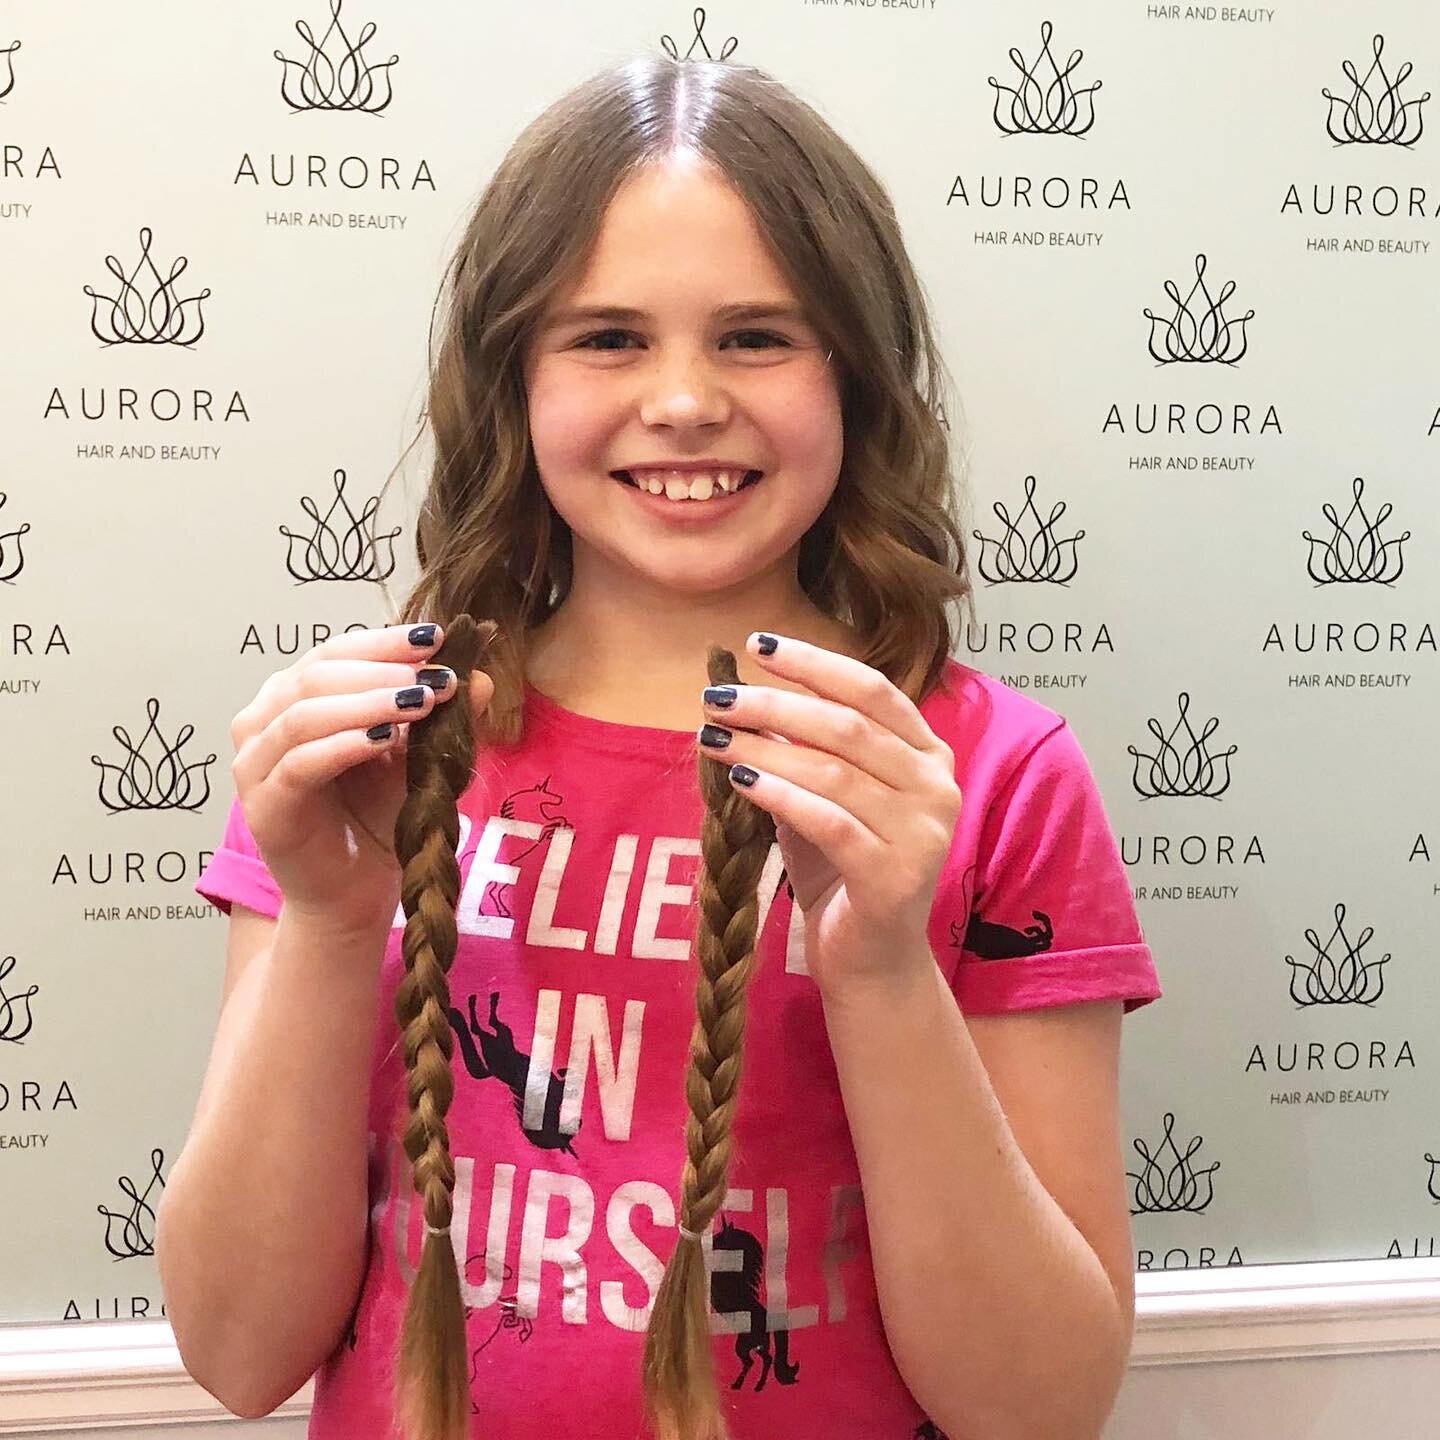 That smile when you know you are doing an amazing thing! This brave young lady donating all that hair to @officiallittleprincesstrust